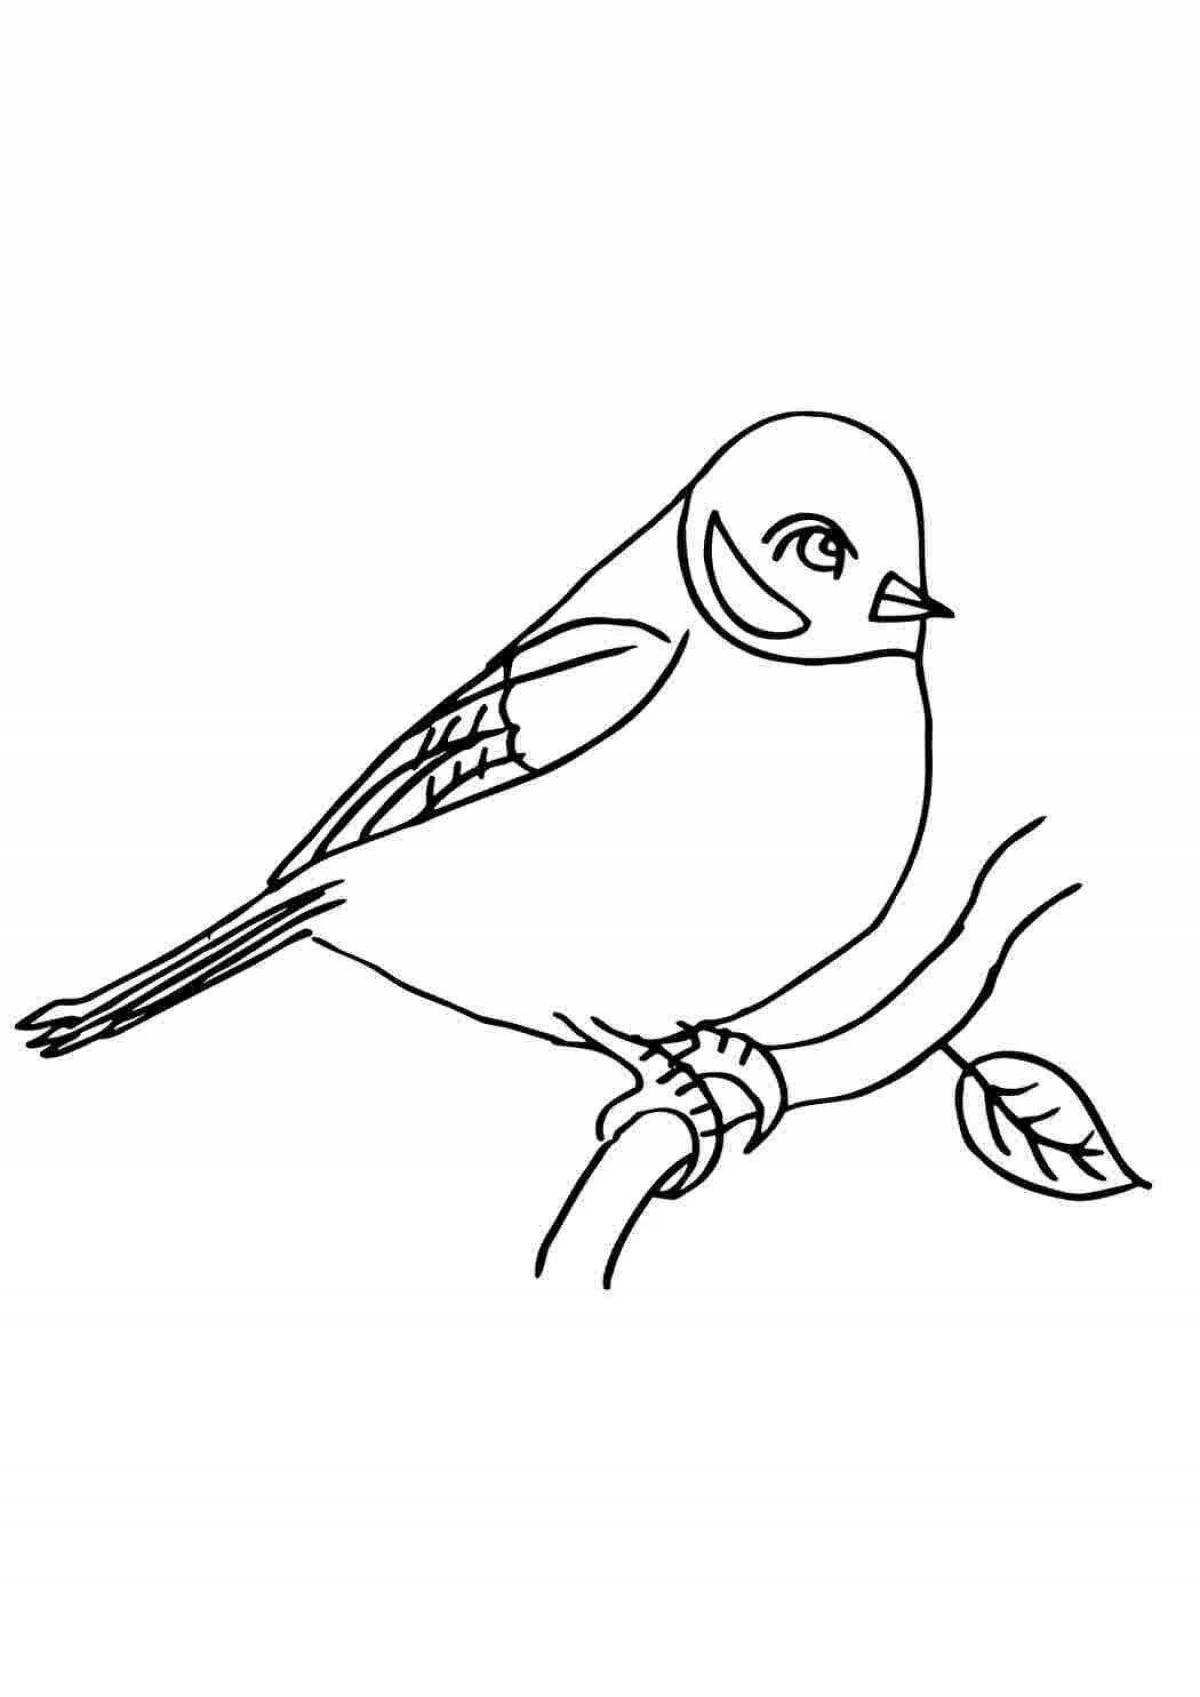 Coloring page mysterious drawing of tits